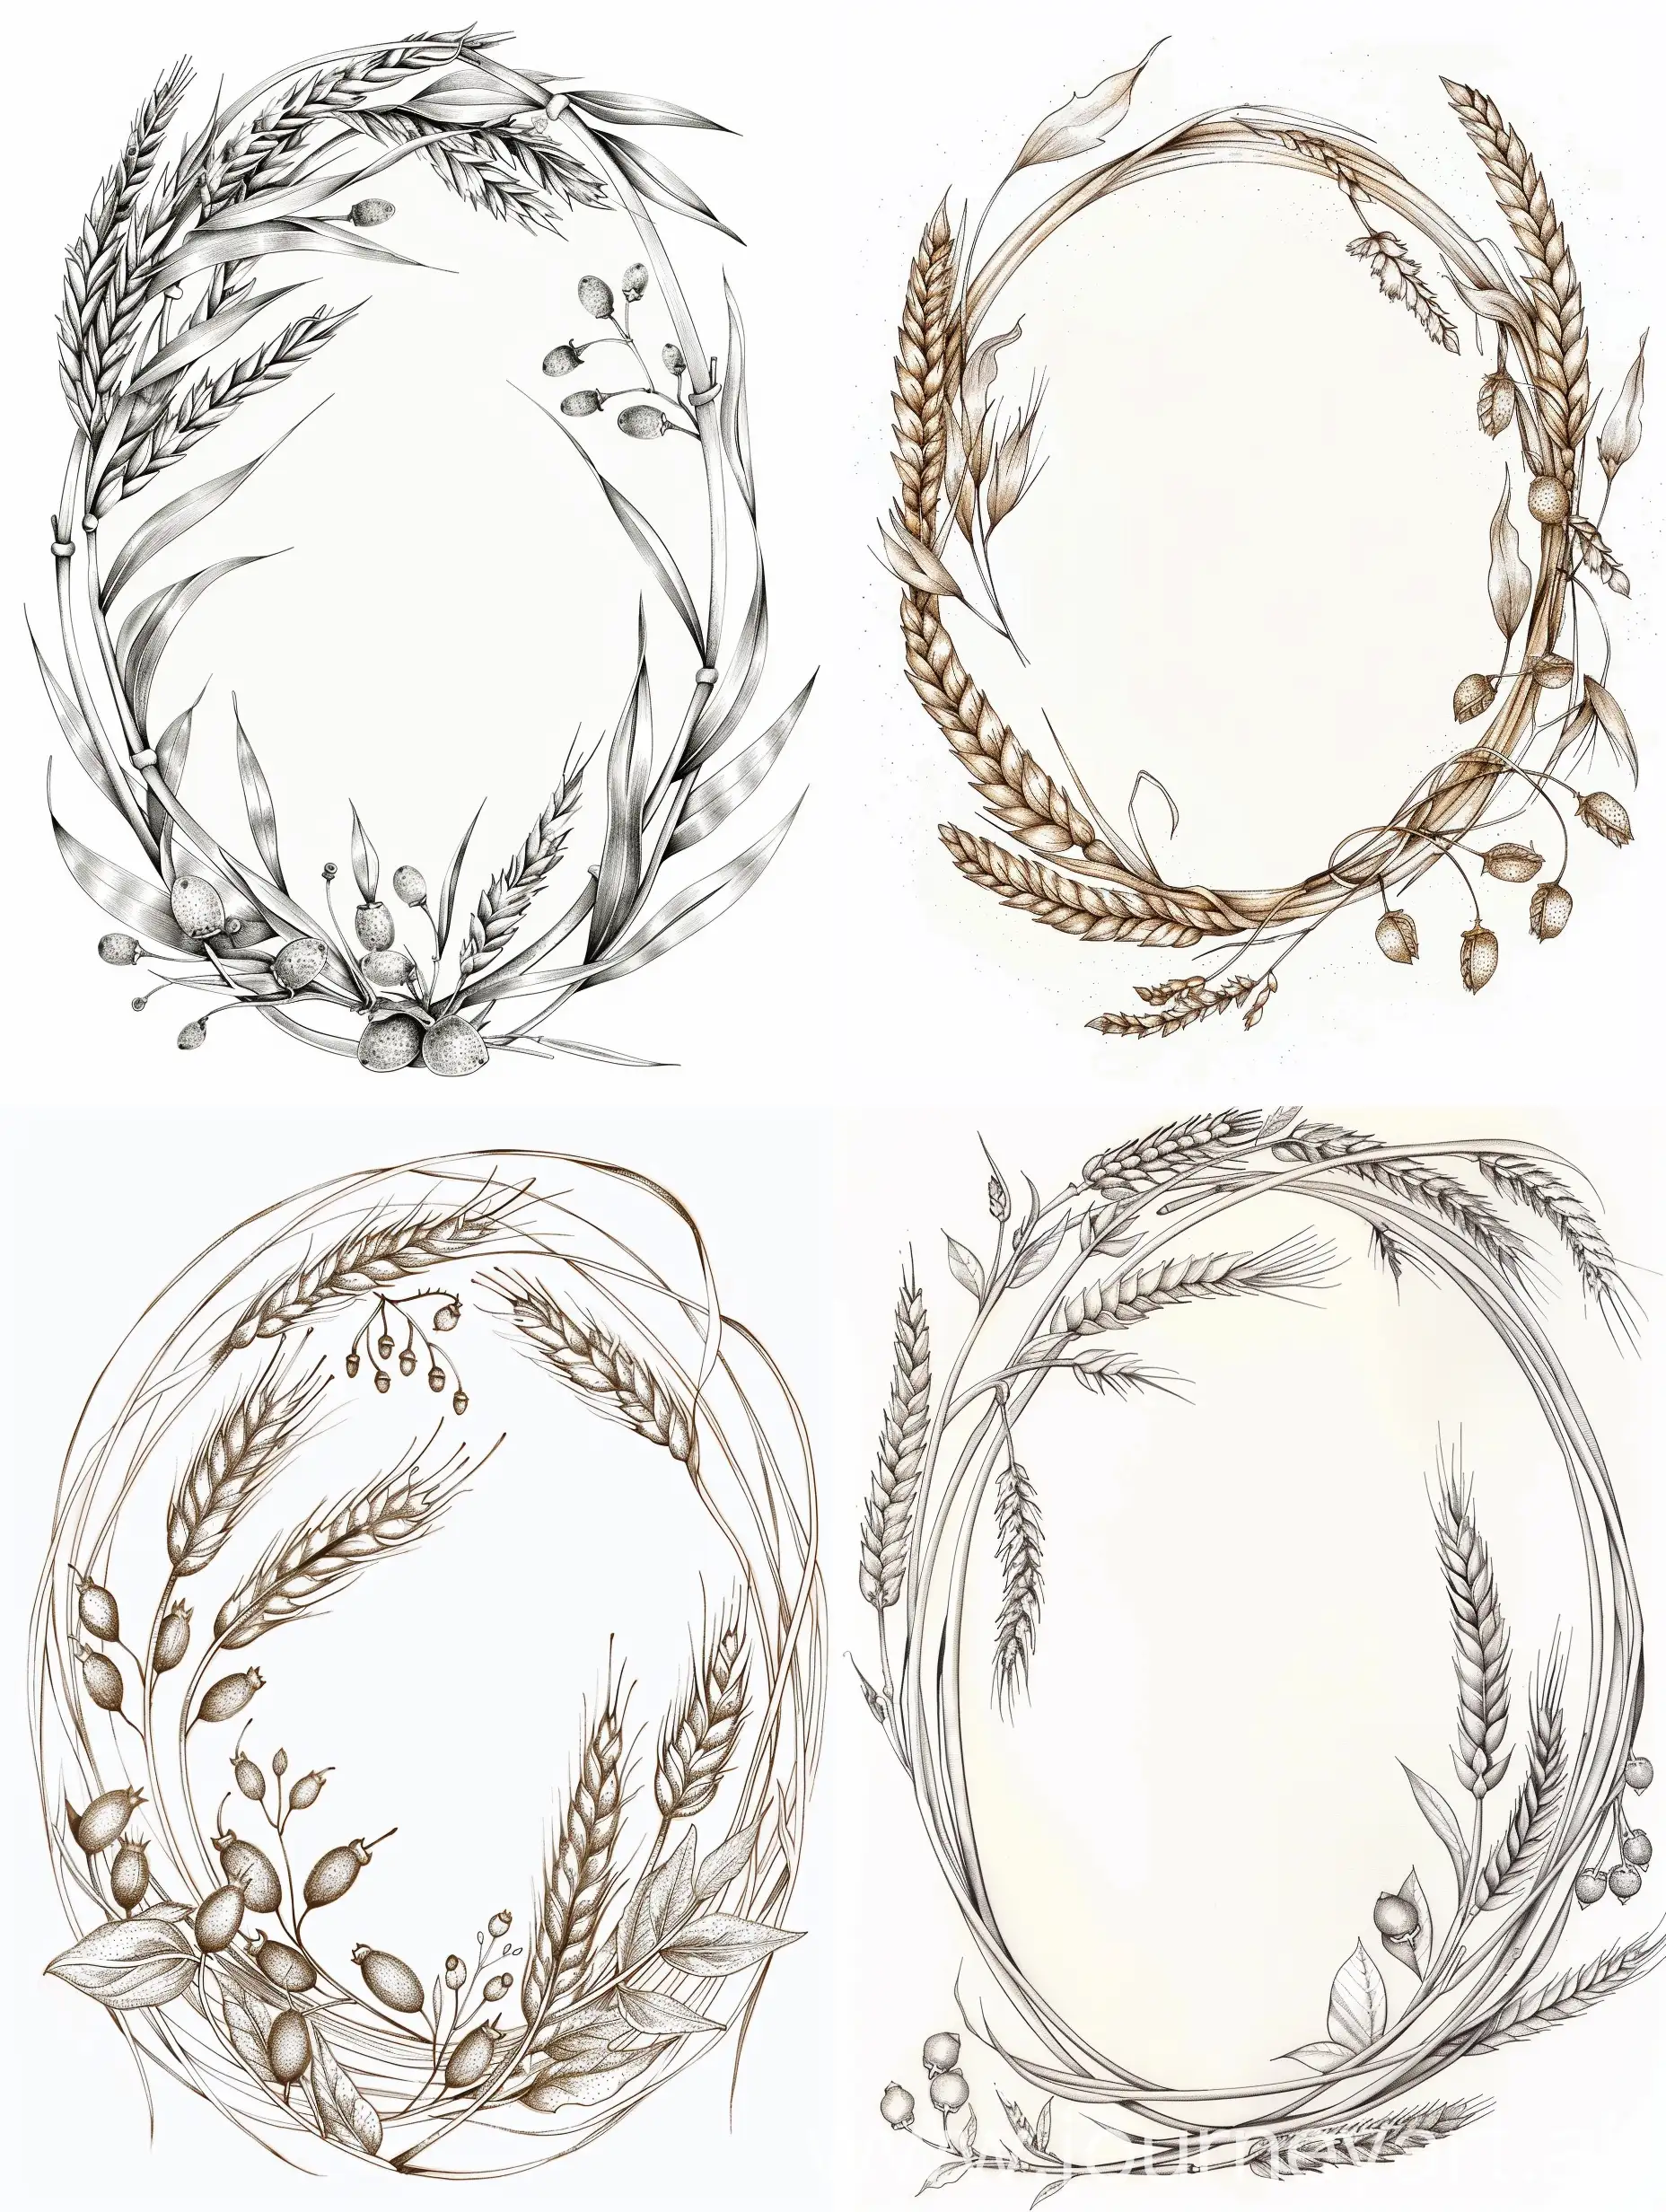 Whimsical-Wheat-and-Pepper-Oval-Frame-Illustration